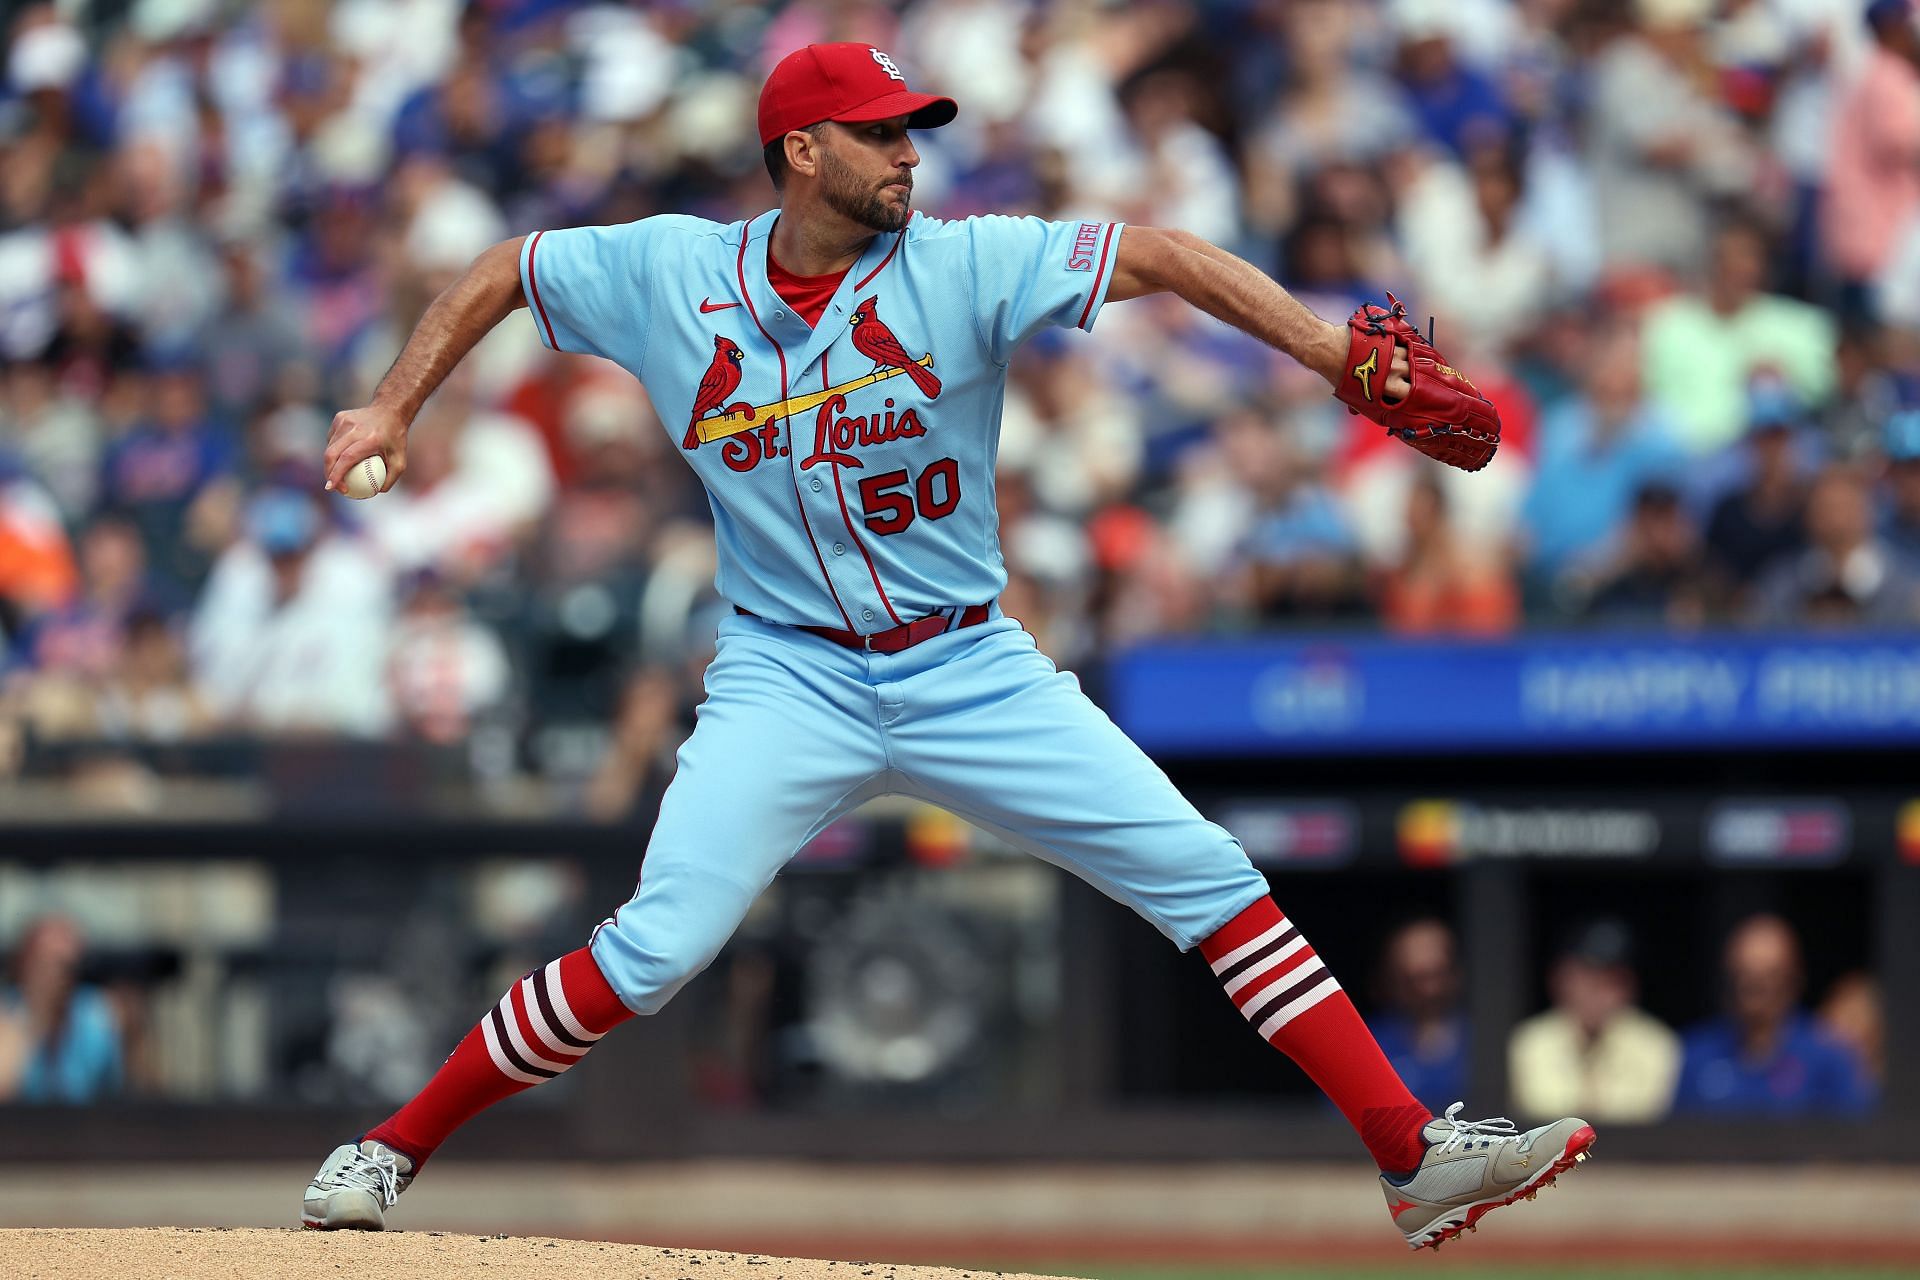 Adam Wainwright of the St. Louis Cardinals pitches against the New York Mets at Citi Field